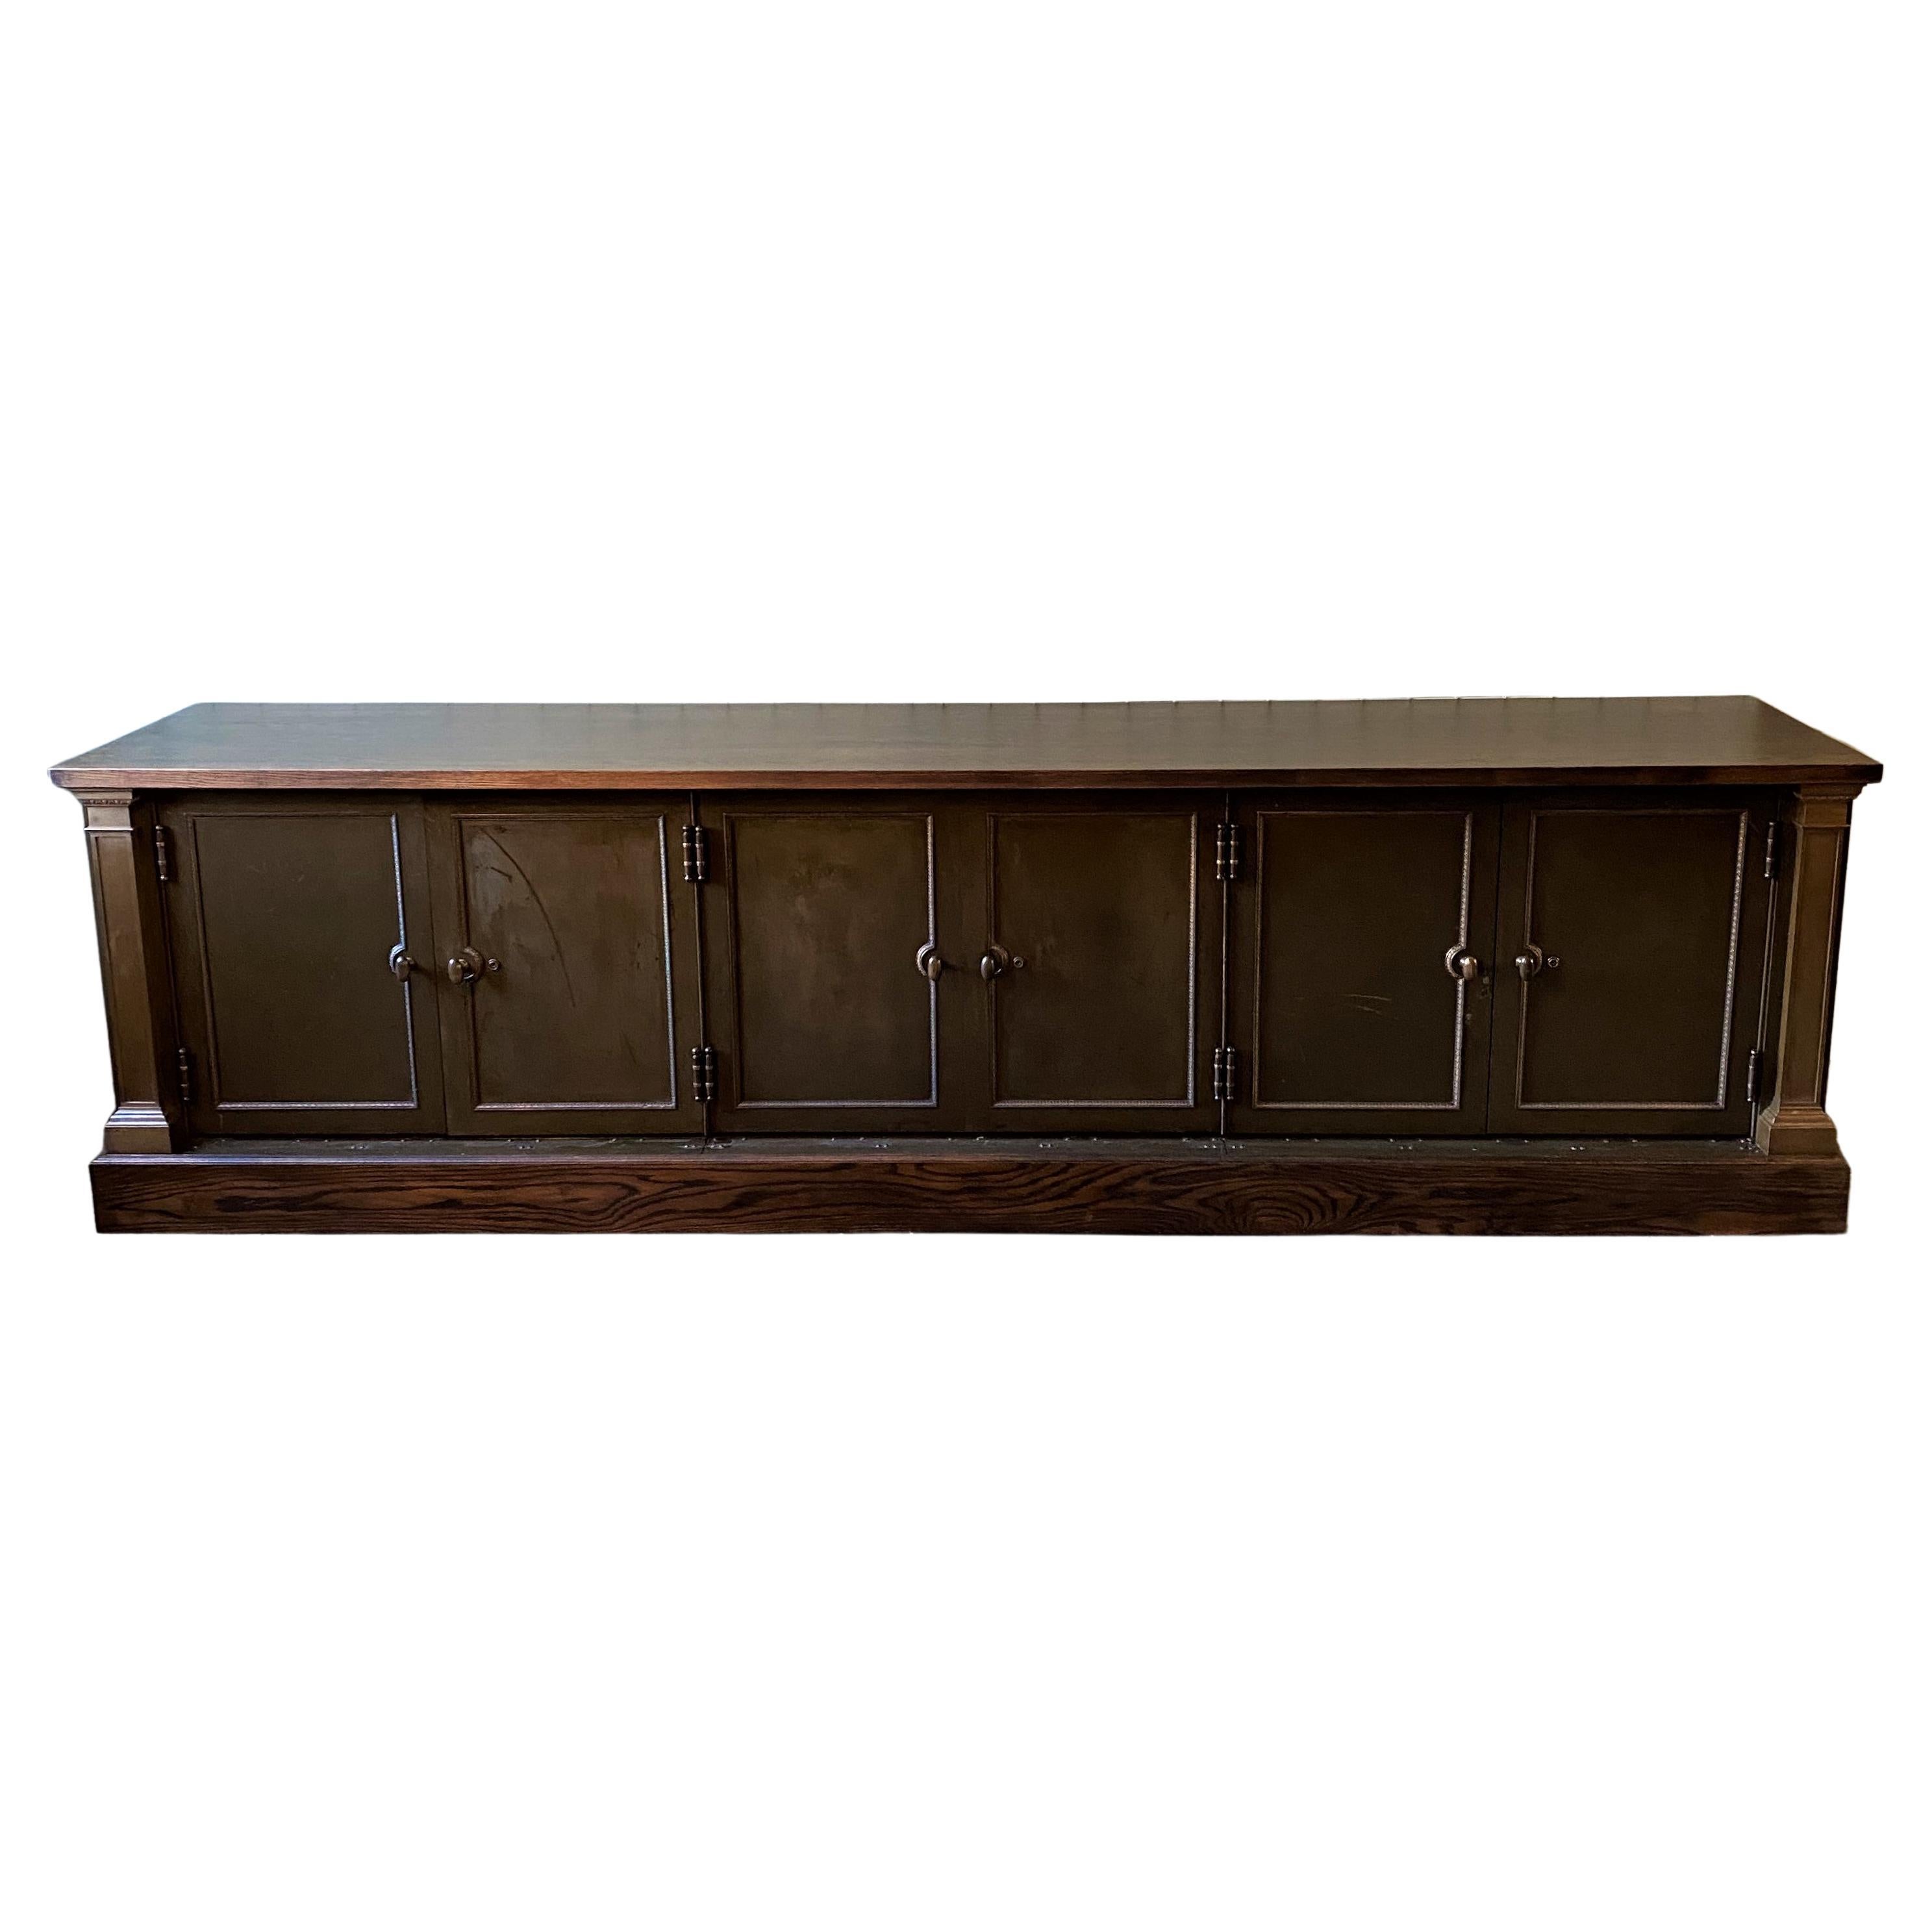 Executive Steel Credenza / Cabinet For Sale